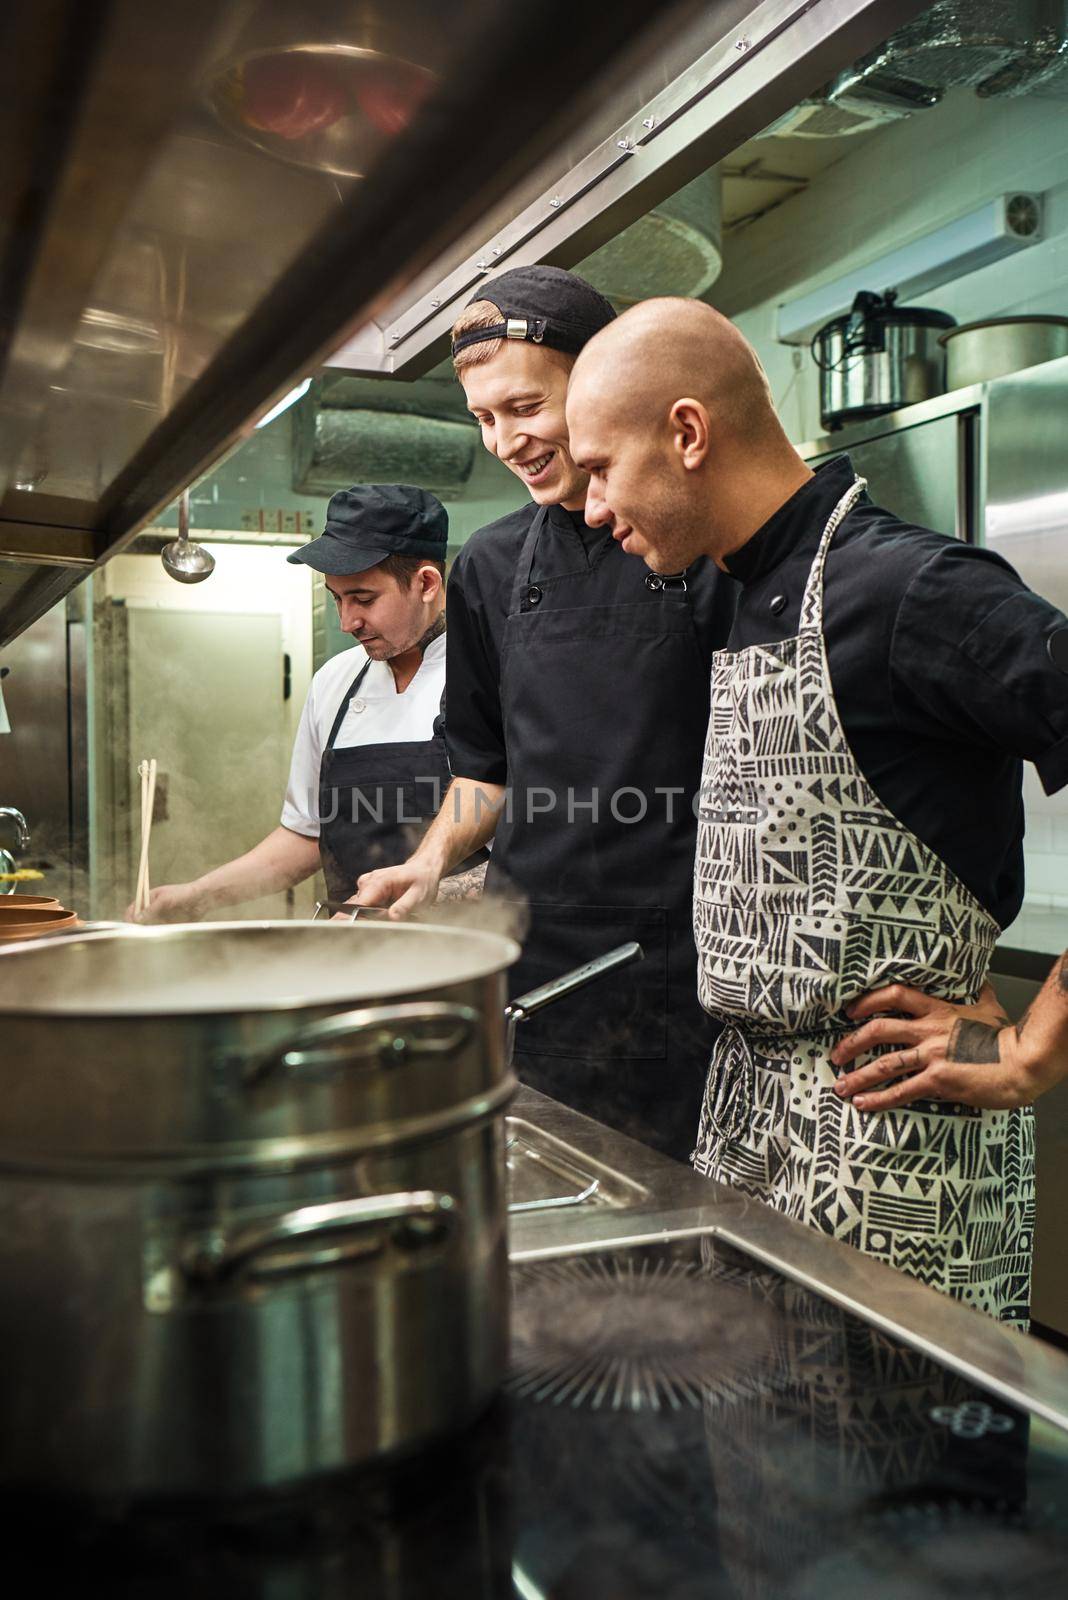 Great job. Cheerful professional chef looking how his two assistants are cooking in a restaurant kitchen. Preparing food